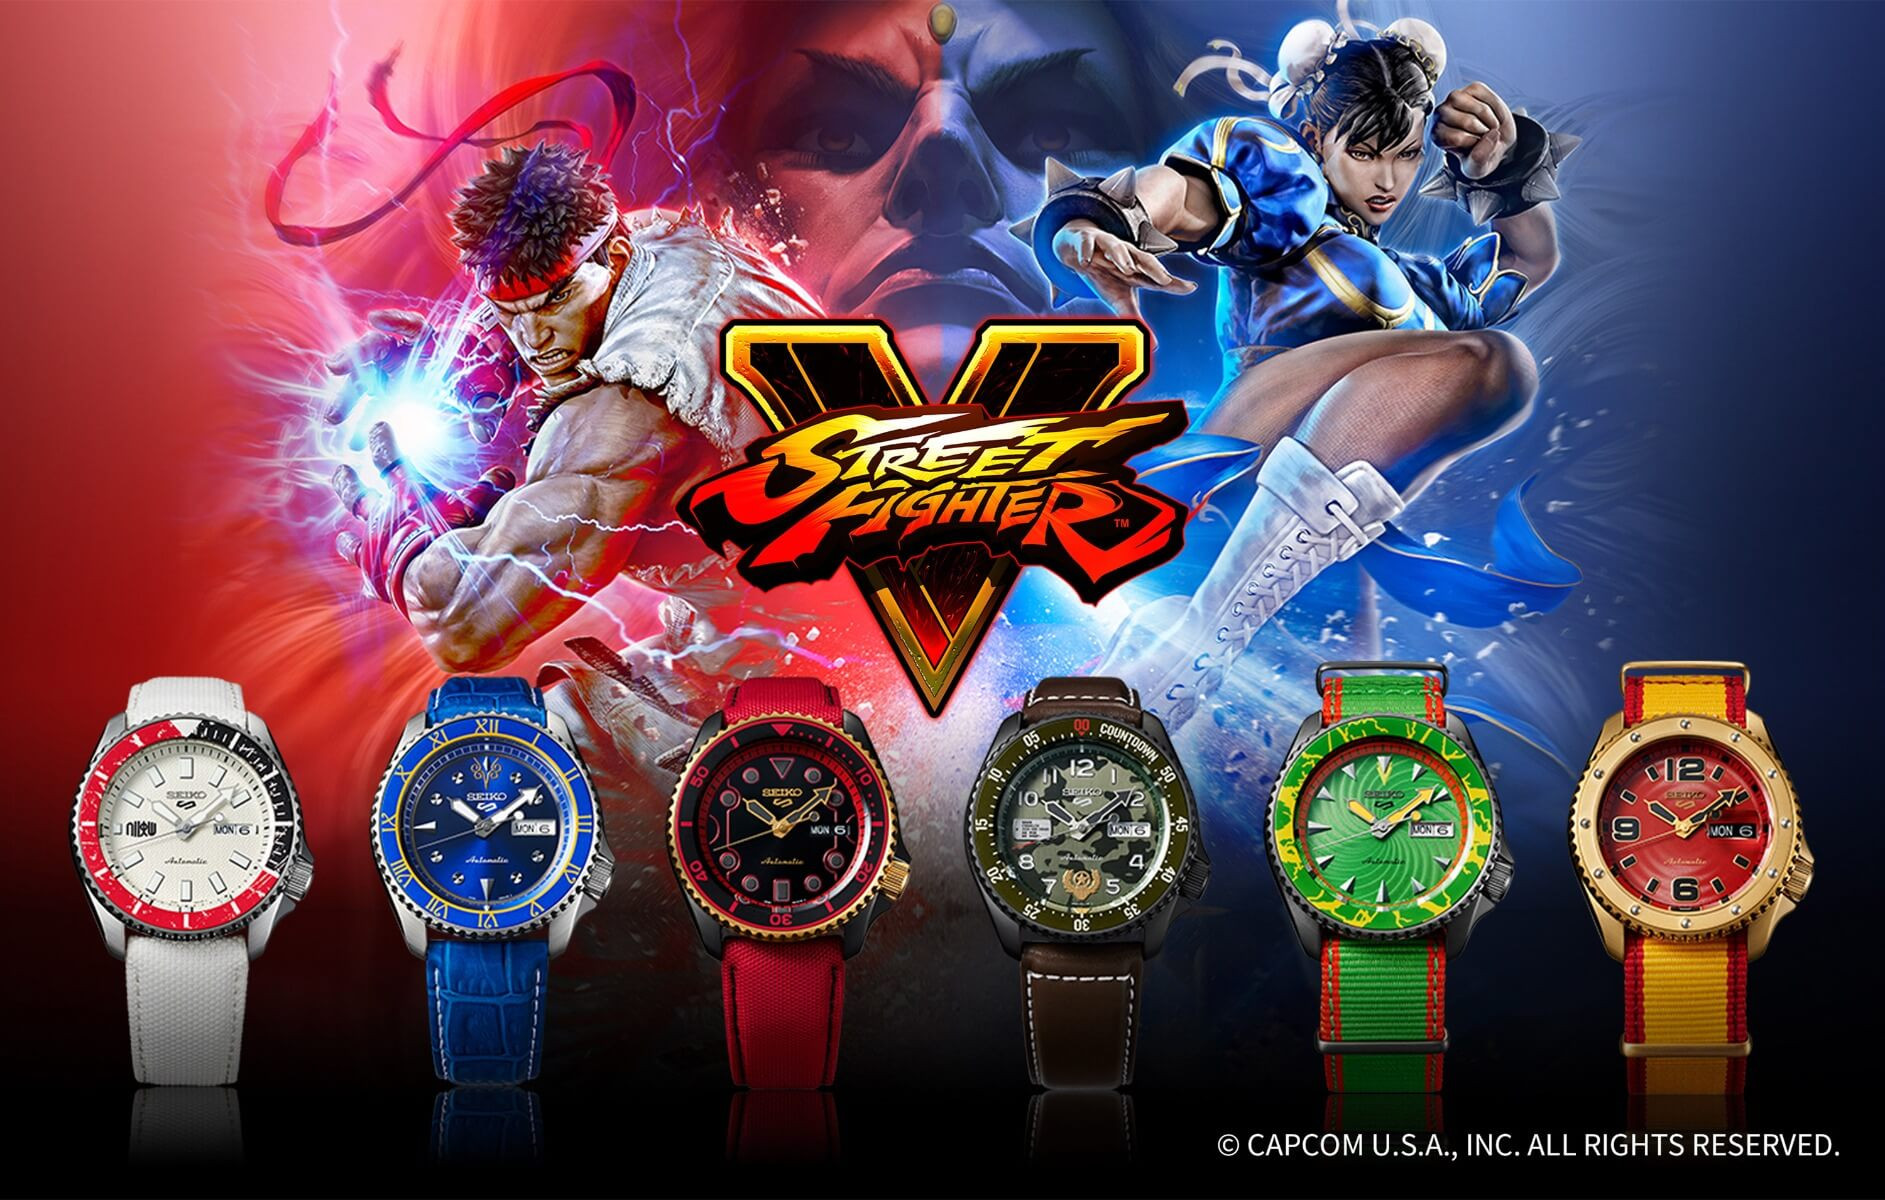 Seiko Street Fighter Limited Edition Series